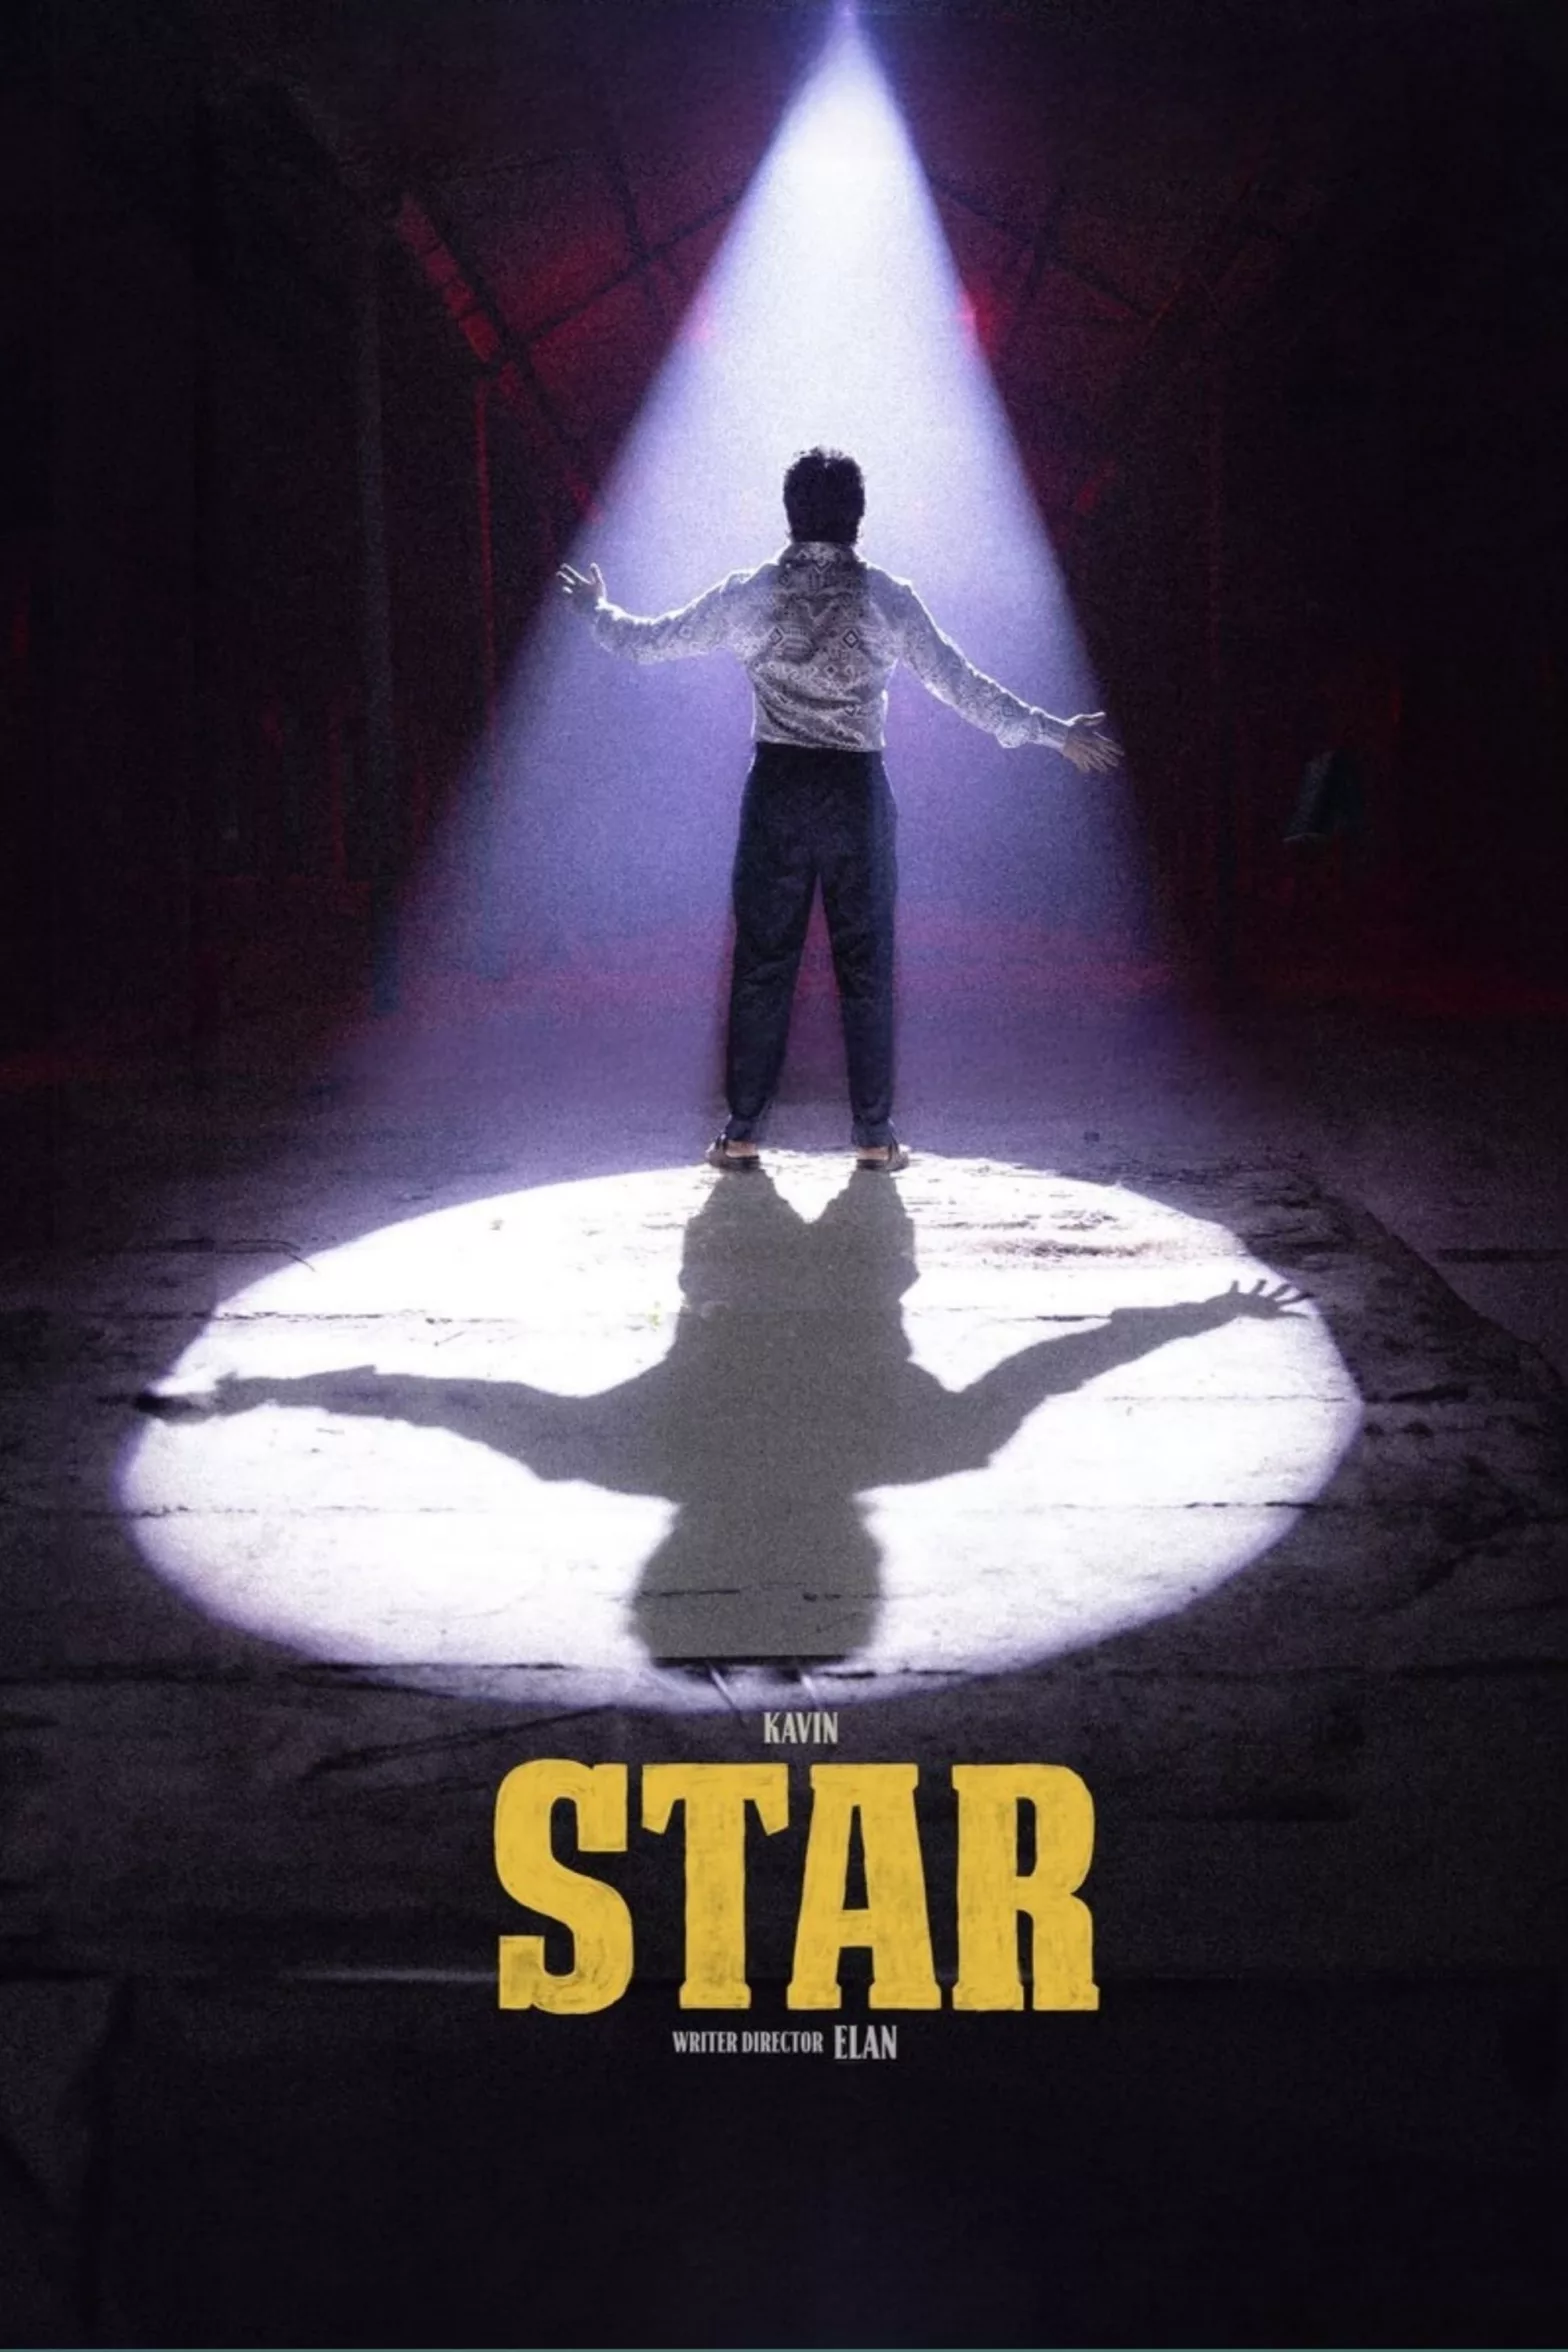 Poster for the movie "Star"